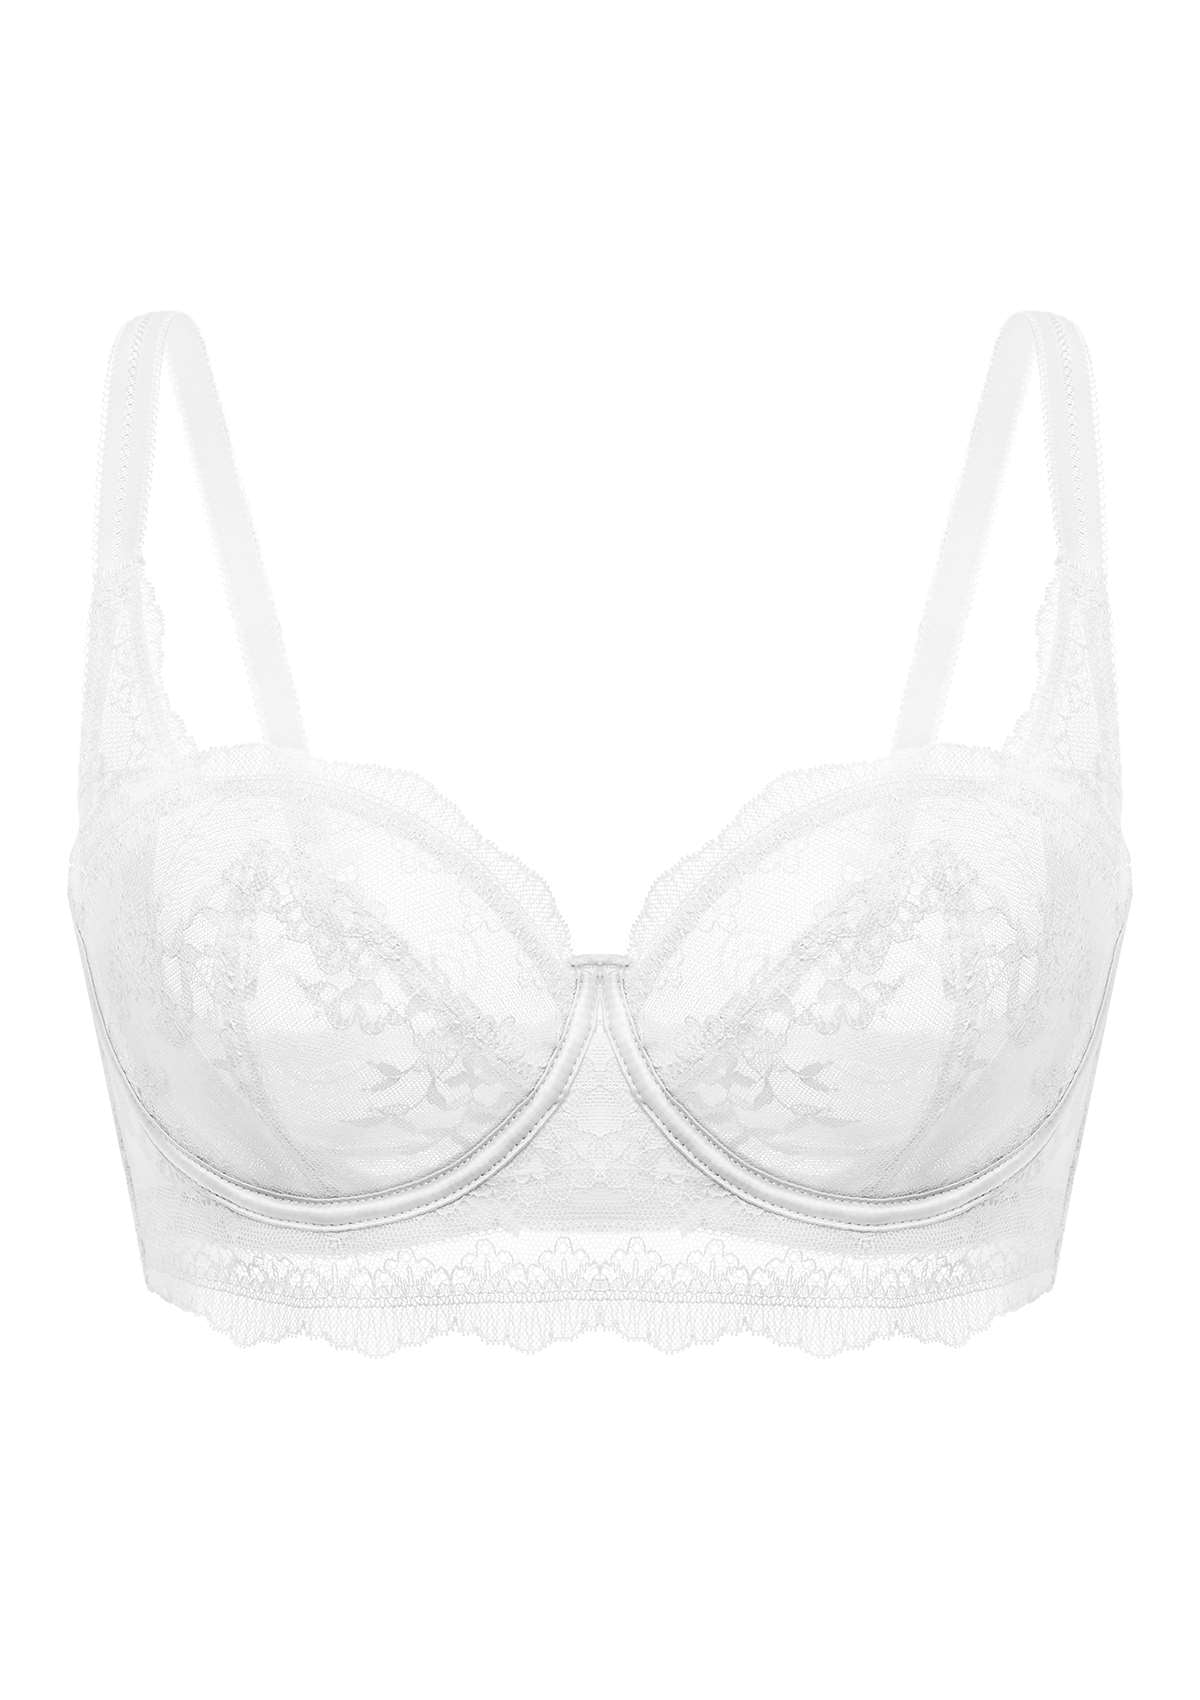 HSIA I Do Floral Lace Bridal Balconette Beautiful Bra For Special Day - Burgundy / 42 / DD/E